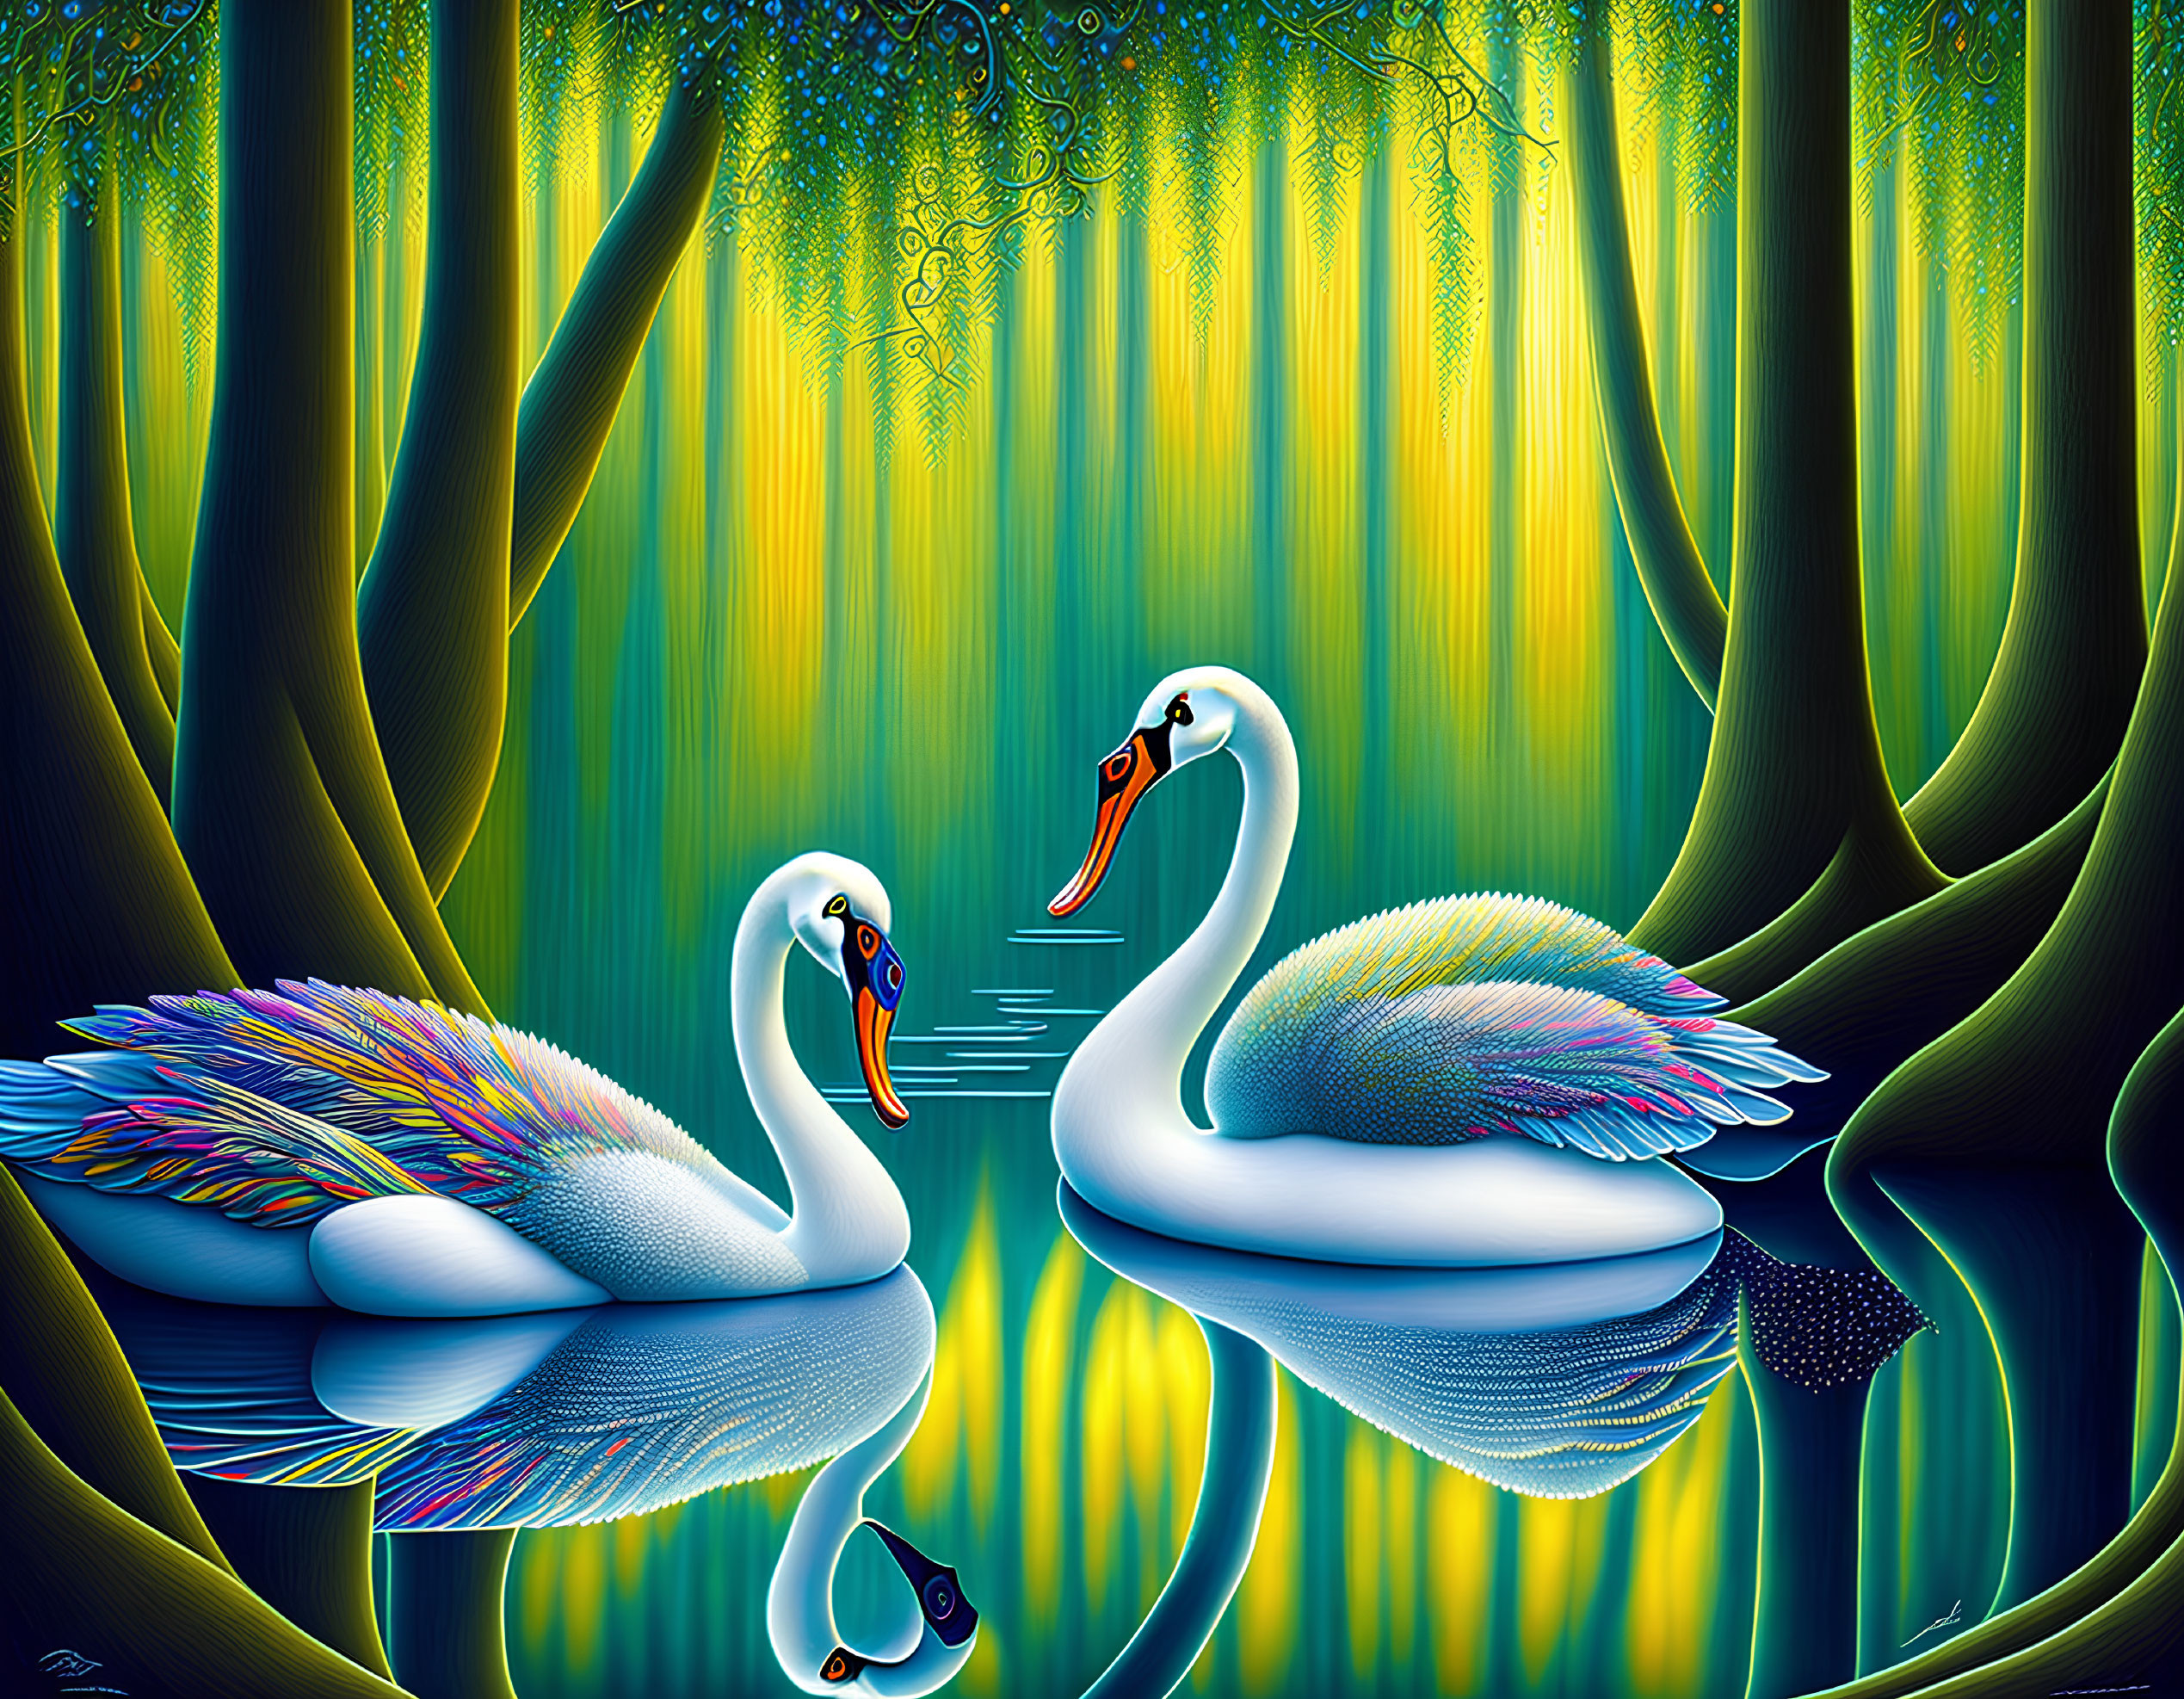 Vibrant swans on reflective water in colorful forest